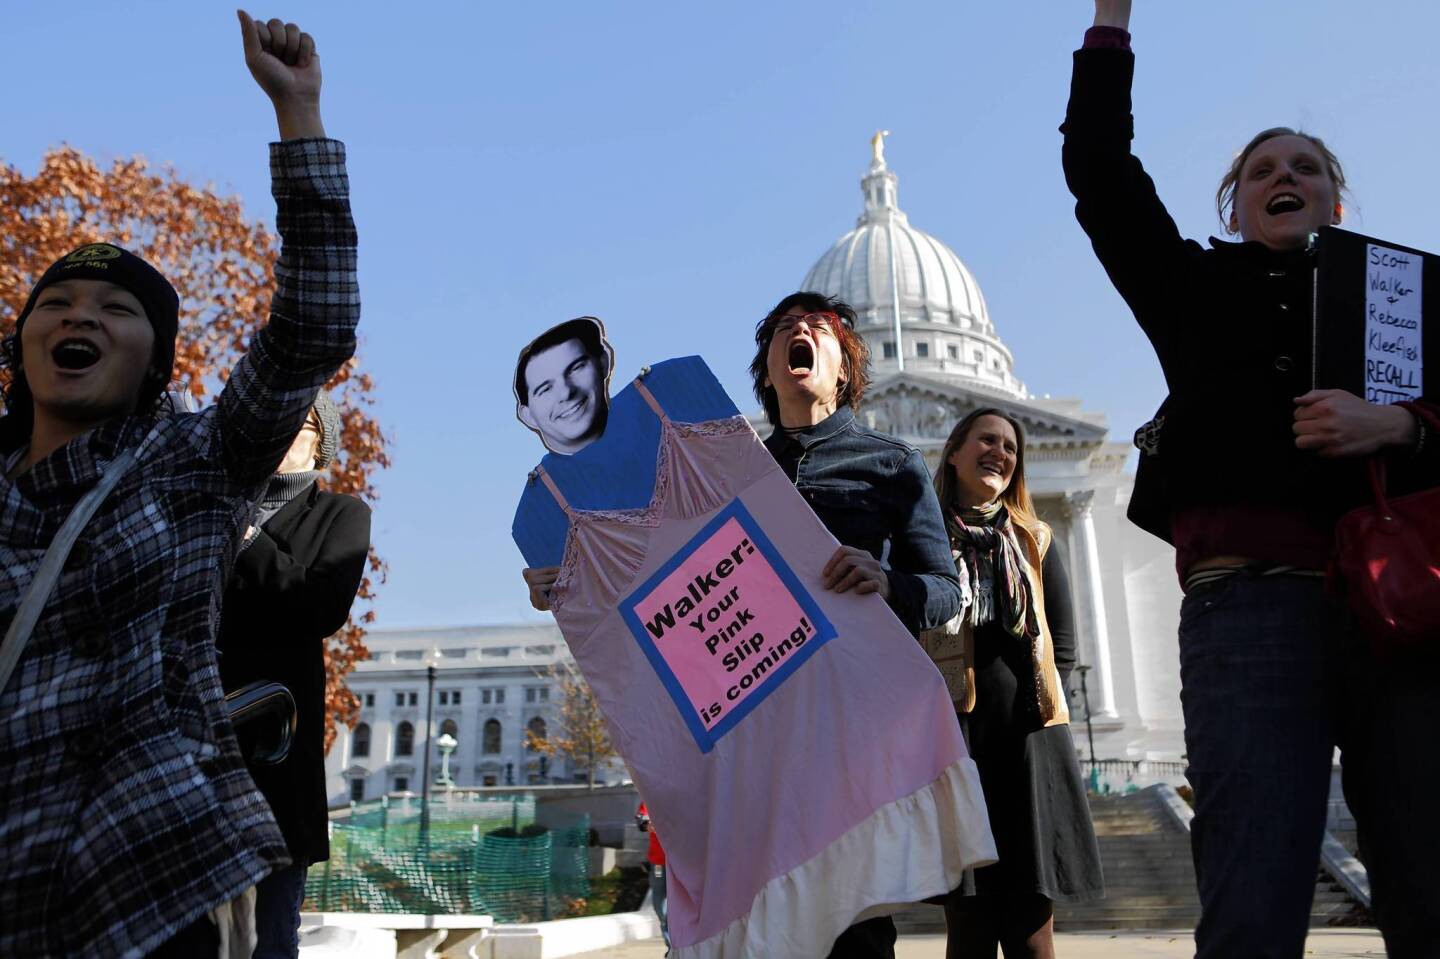 Linda Hedenblad, of Madison (center) brings a likeness of Wisconsin Gov. Scott Walker to the daily Solidarity Sing-Along at the State Capitol in Madison. The singers, who have been singing protest songs at noon in or around the Capitol for months, held a special gathering to kick off the first day of petition signing to force a recall vote on Wisconsin Gov. Scott Walker and Lt. Gov. Rebecca Kleefisch.